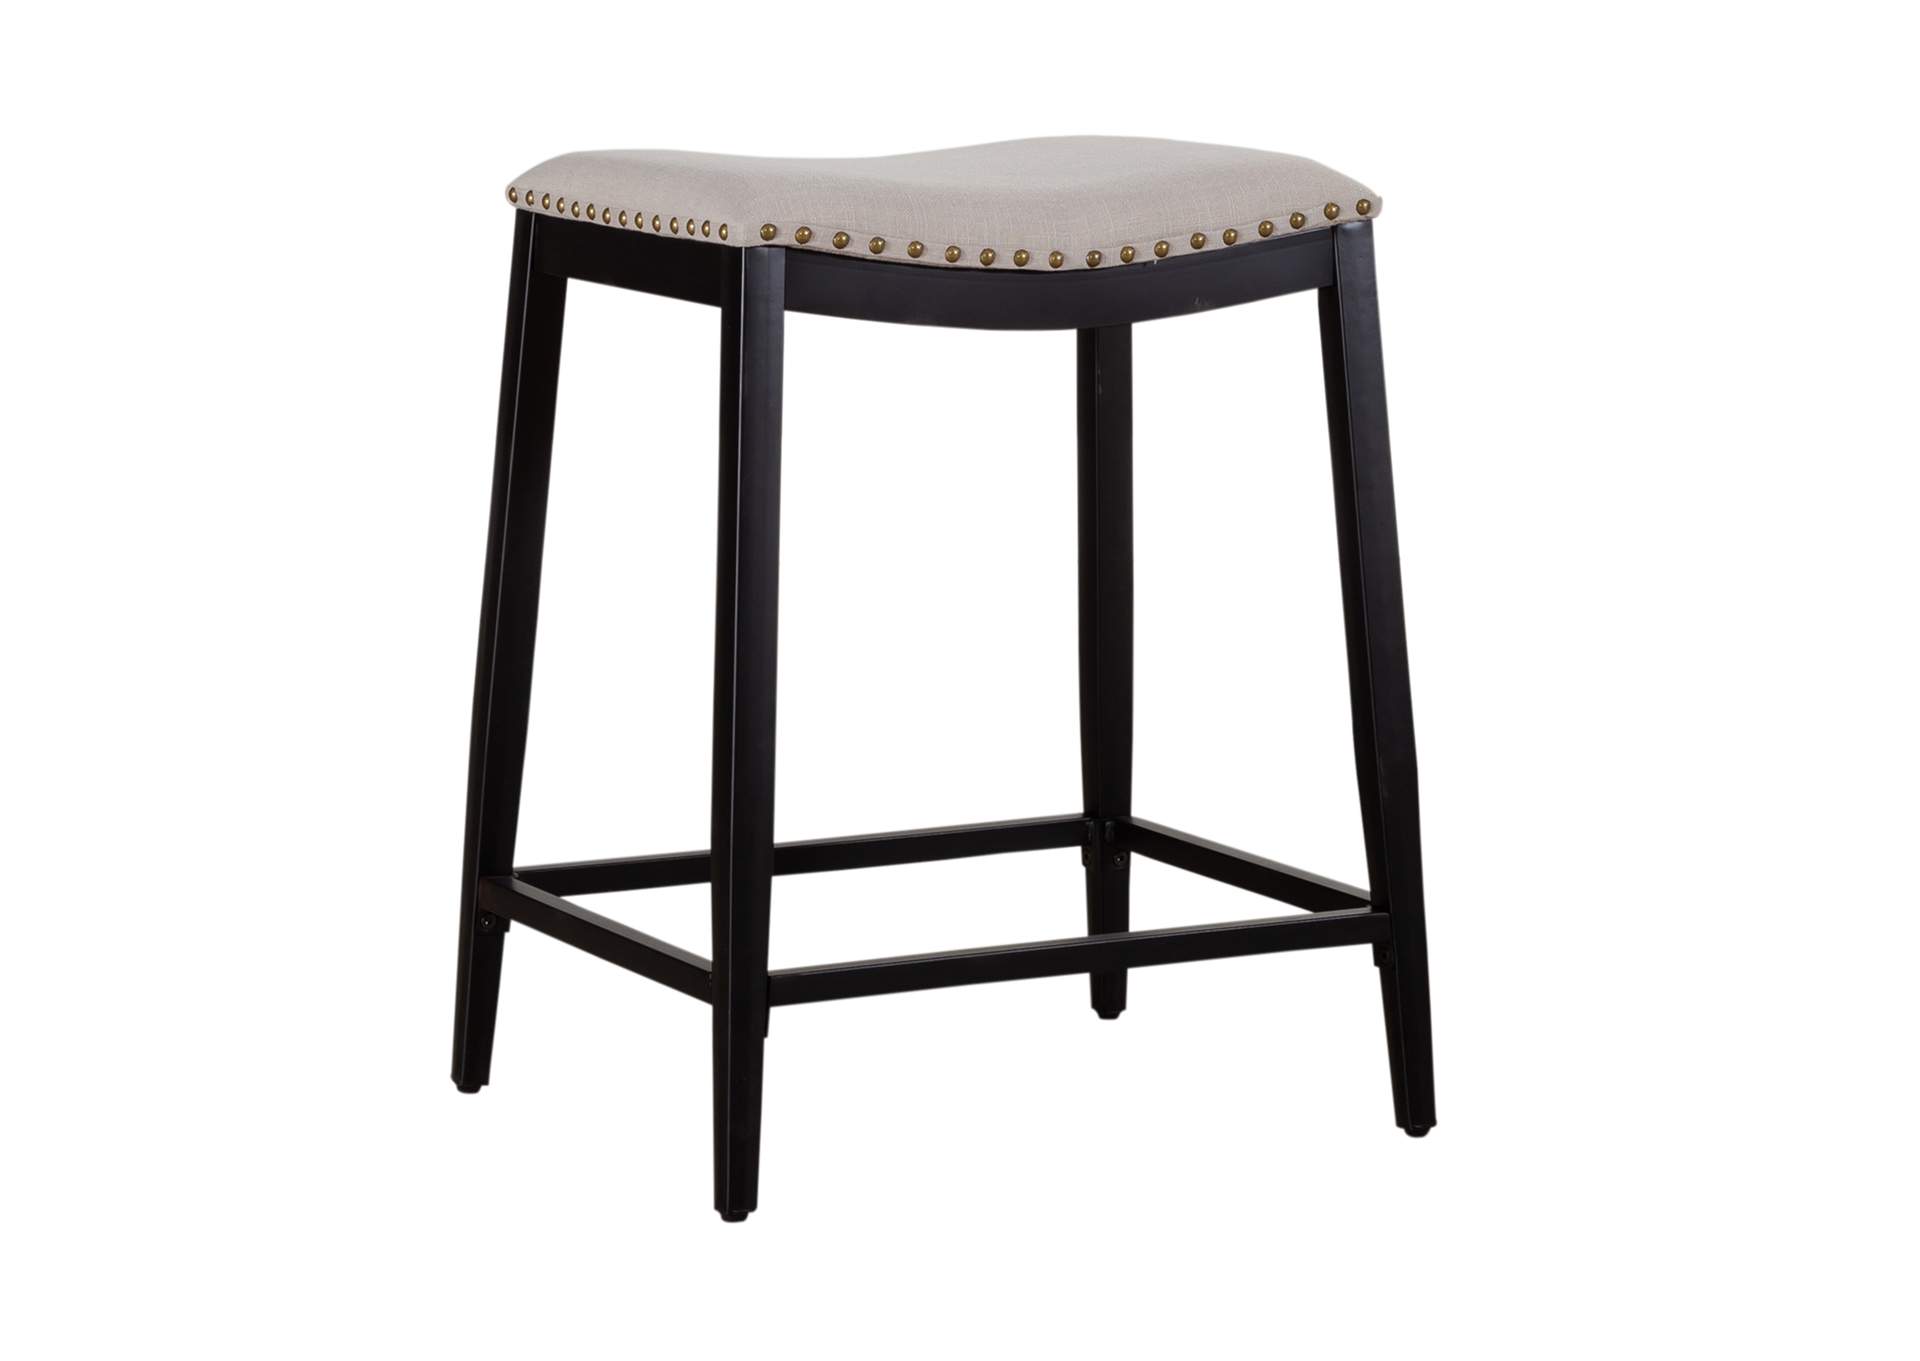 Vintage Series Backless Upholstered Counter Chair - Black,Liberty